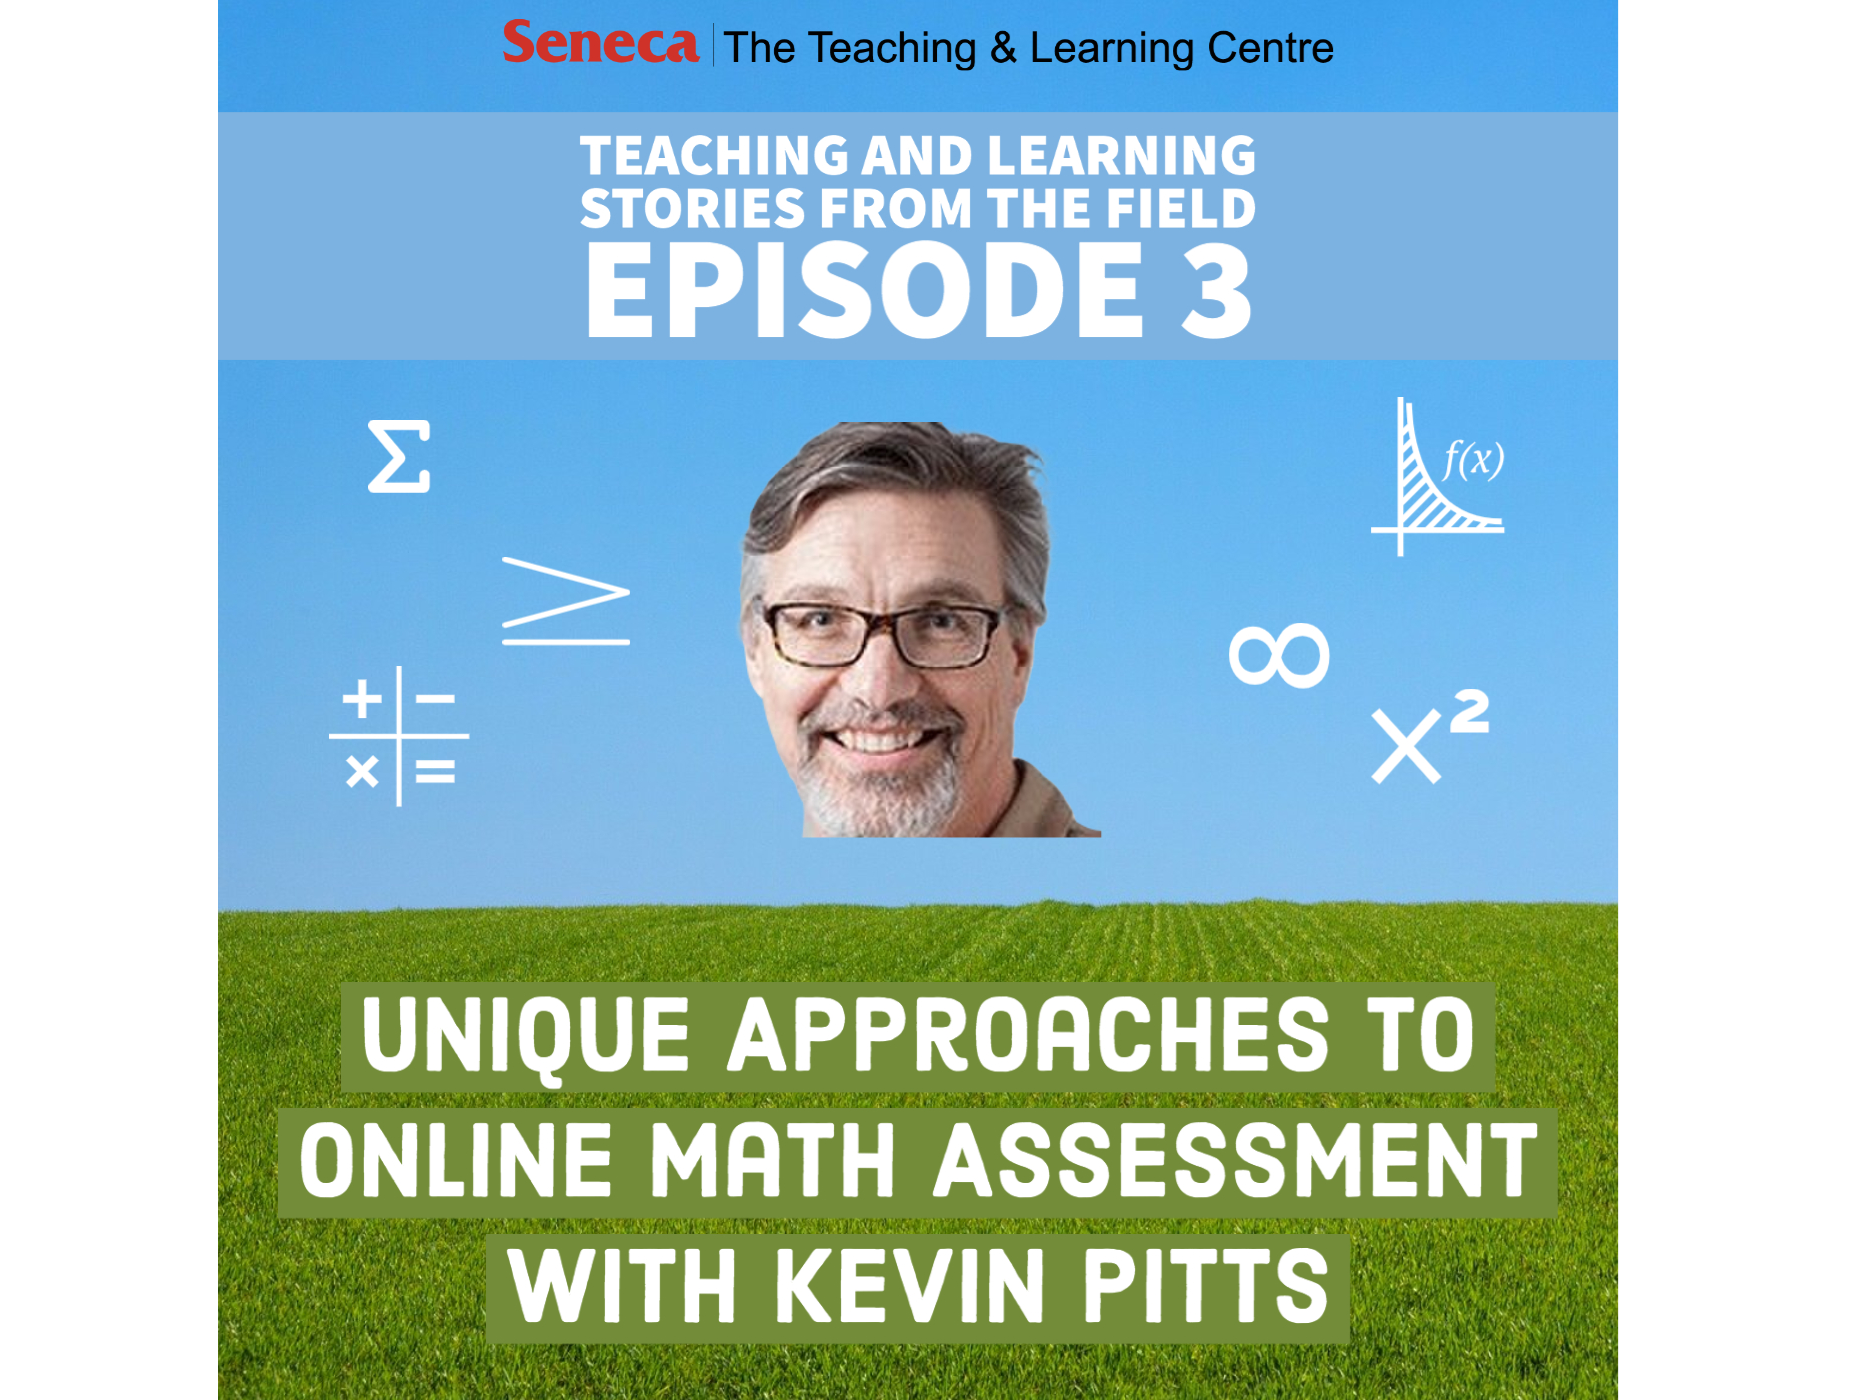 Unique Approaches to Online Math Assessment